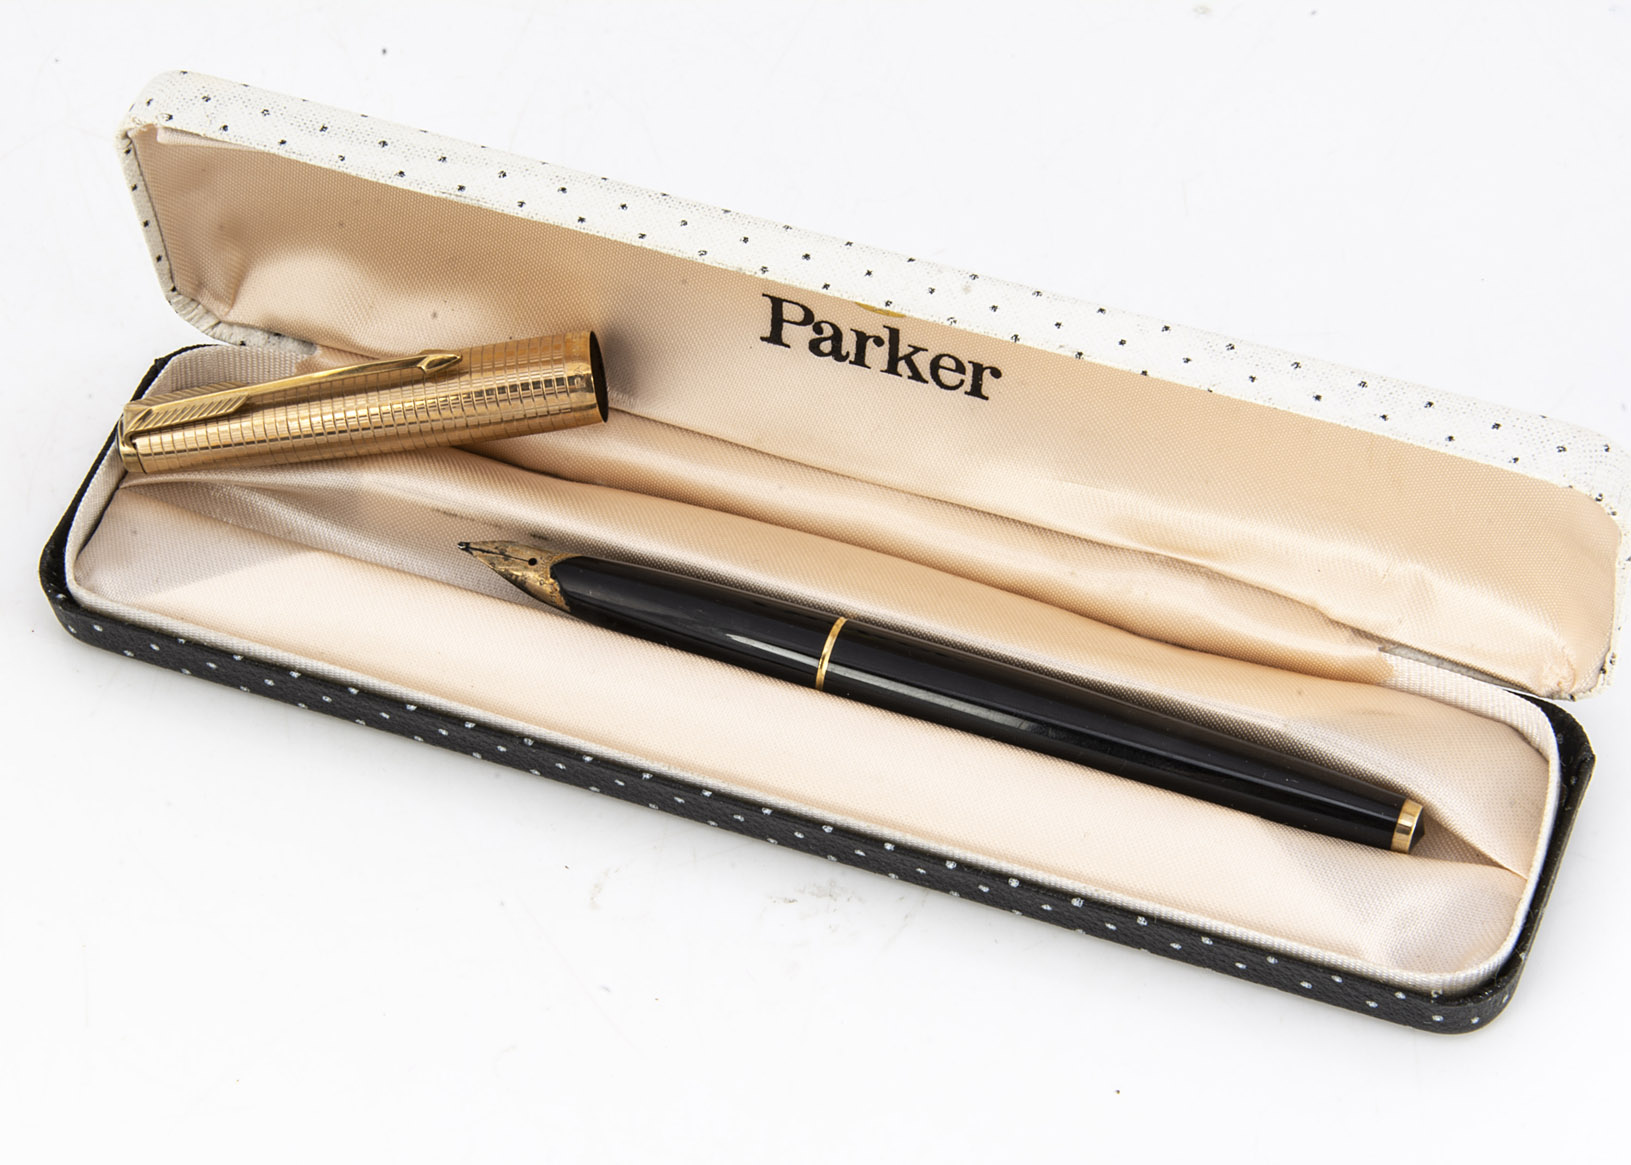 A c1960s Parker fountain pen, rolled gold cap with black barrel and 14ct gold nib, in a Parker